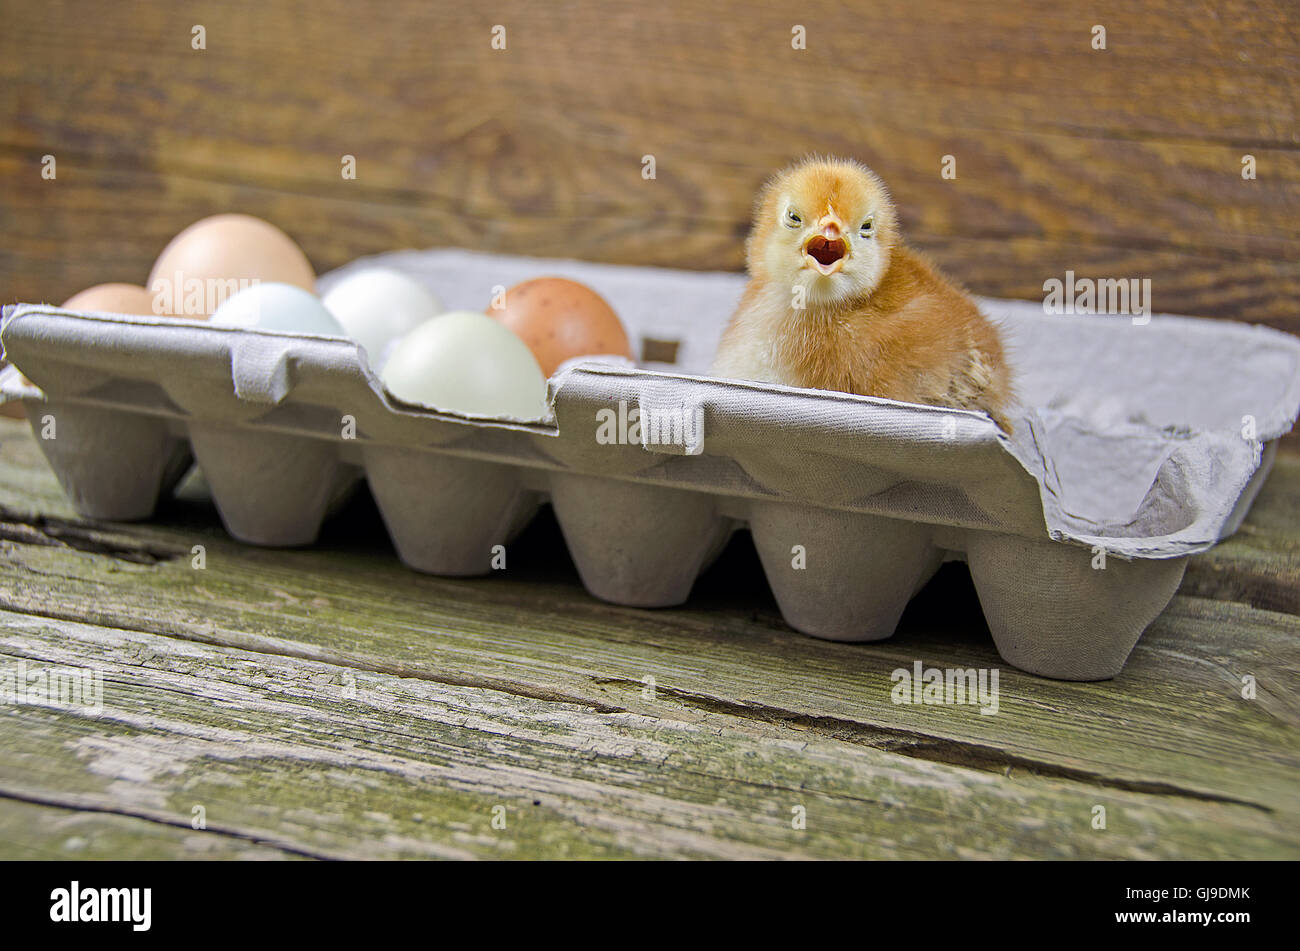 Baby chick and whole eggs in gray egg carton on rustic wood. Stock Photo